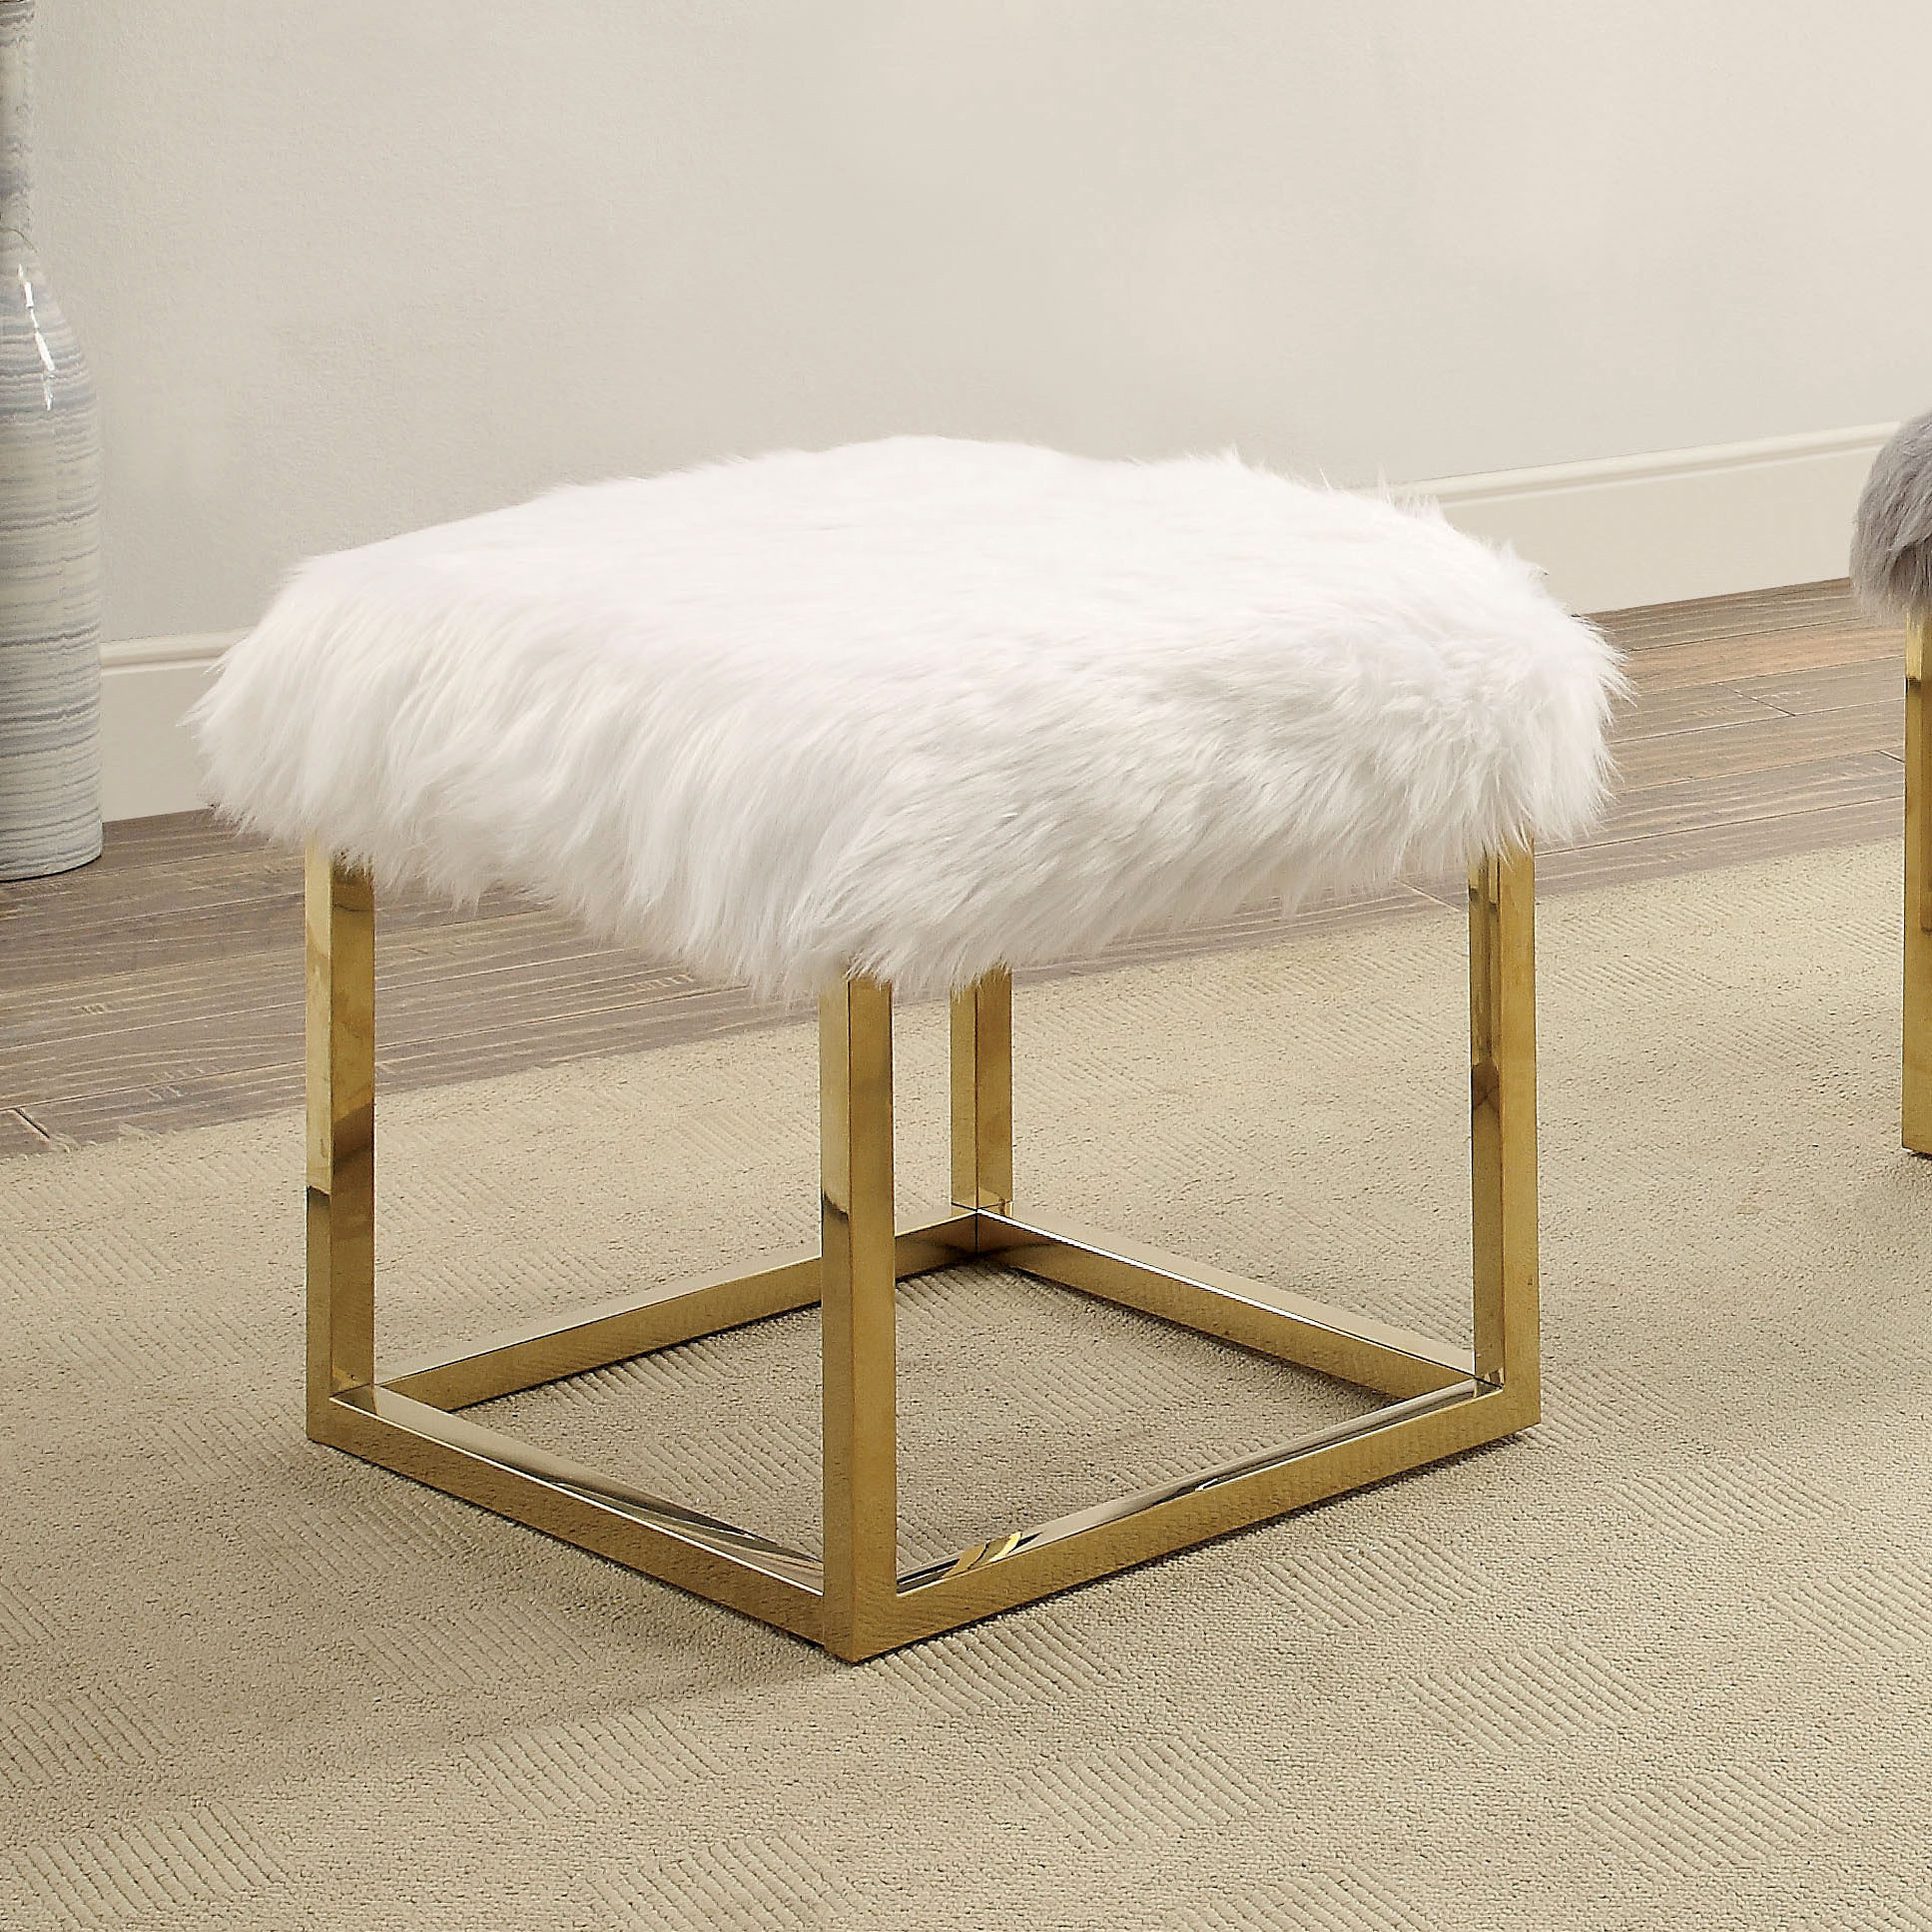 Small Bench For Bedroom
 Contemporary Faux Fur Small Bench White Home Bedroom